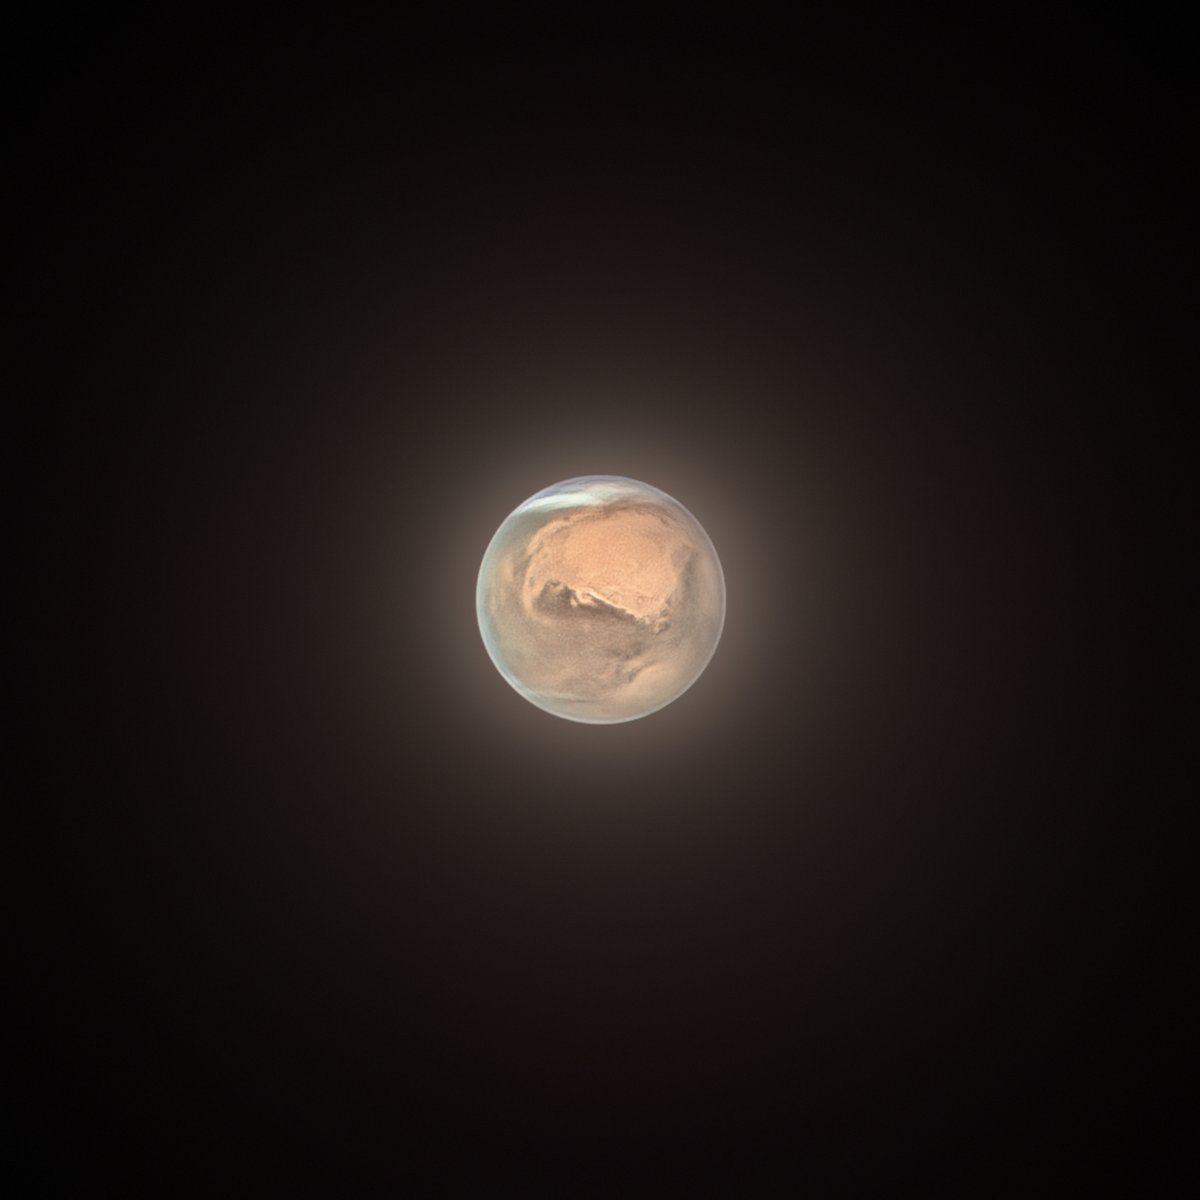 Mars is at it's closest to Earth. Here's a photo I captured of it last night using a 14' telescope. You can clearly see the northern polar ice cap! I'm working hard to learn to overcome the challenges of planetary photography to bring you the best images of Mars at opposition.